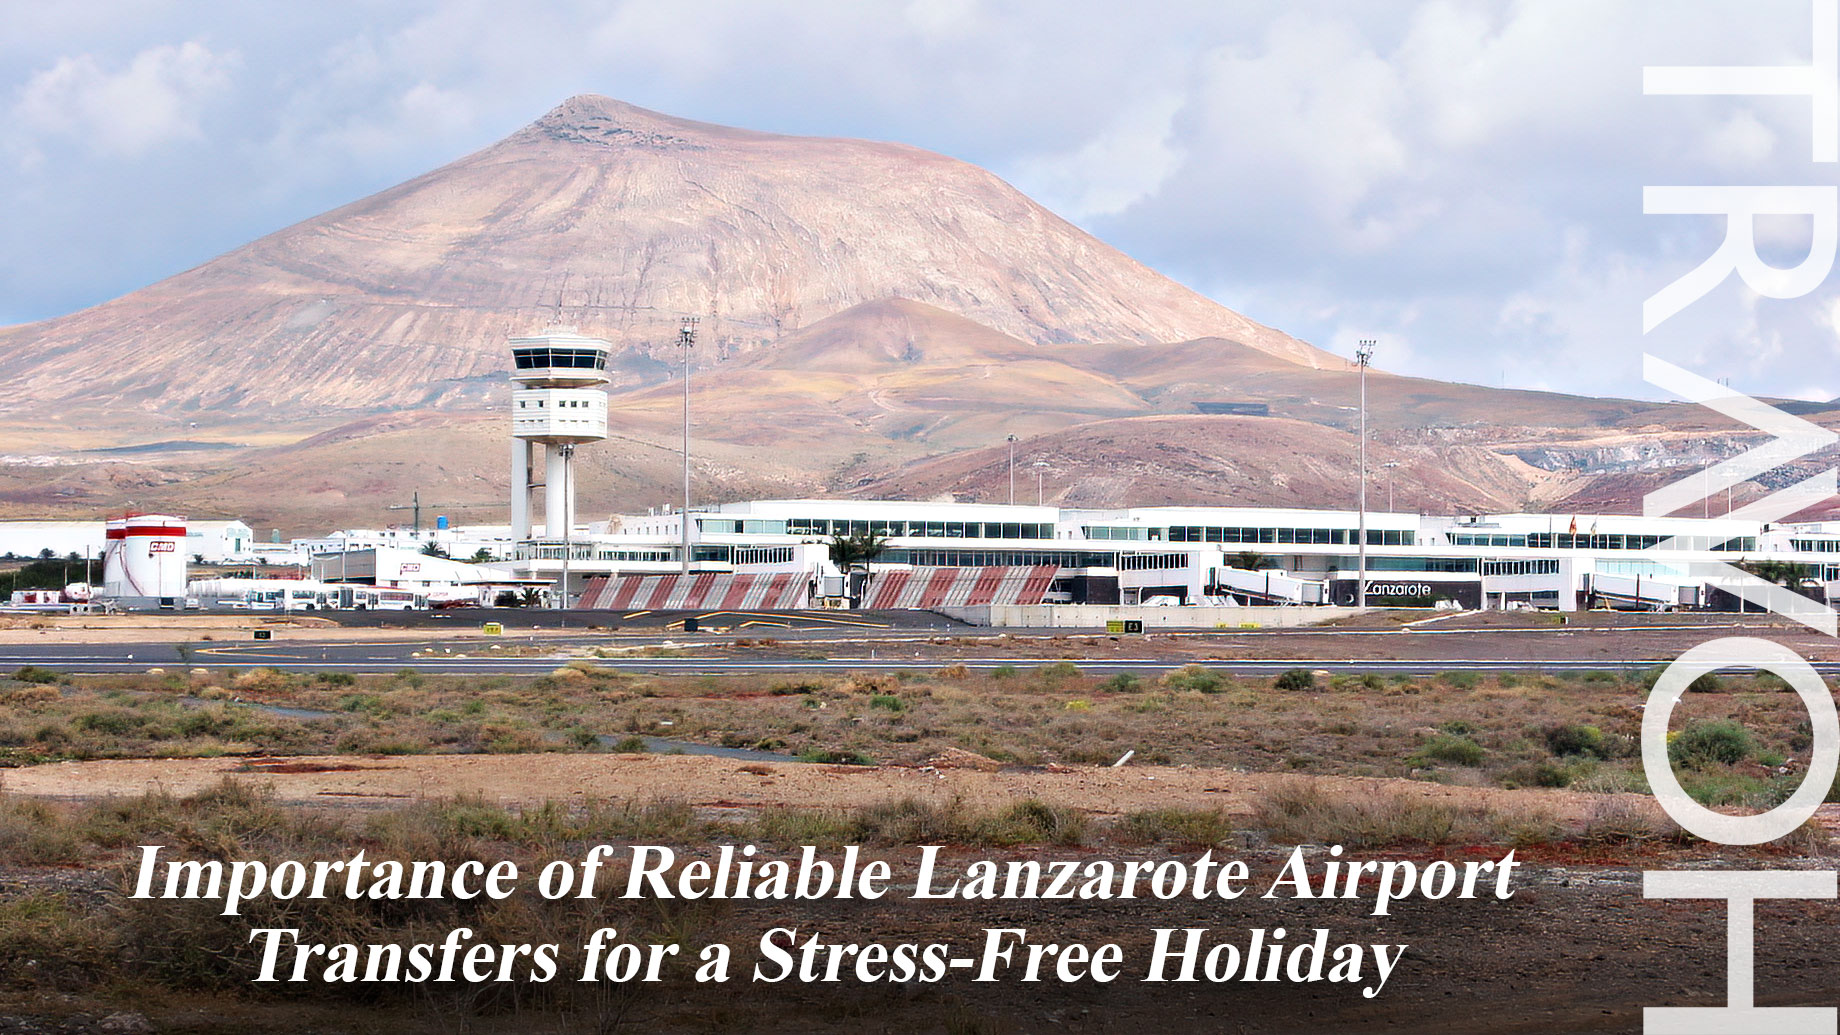 Importance of Reliable Lanzarote Airport Transfers for a Stress-Free Holiday